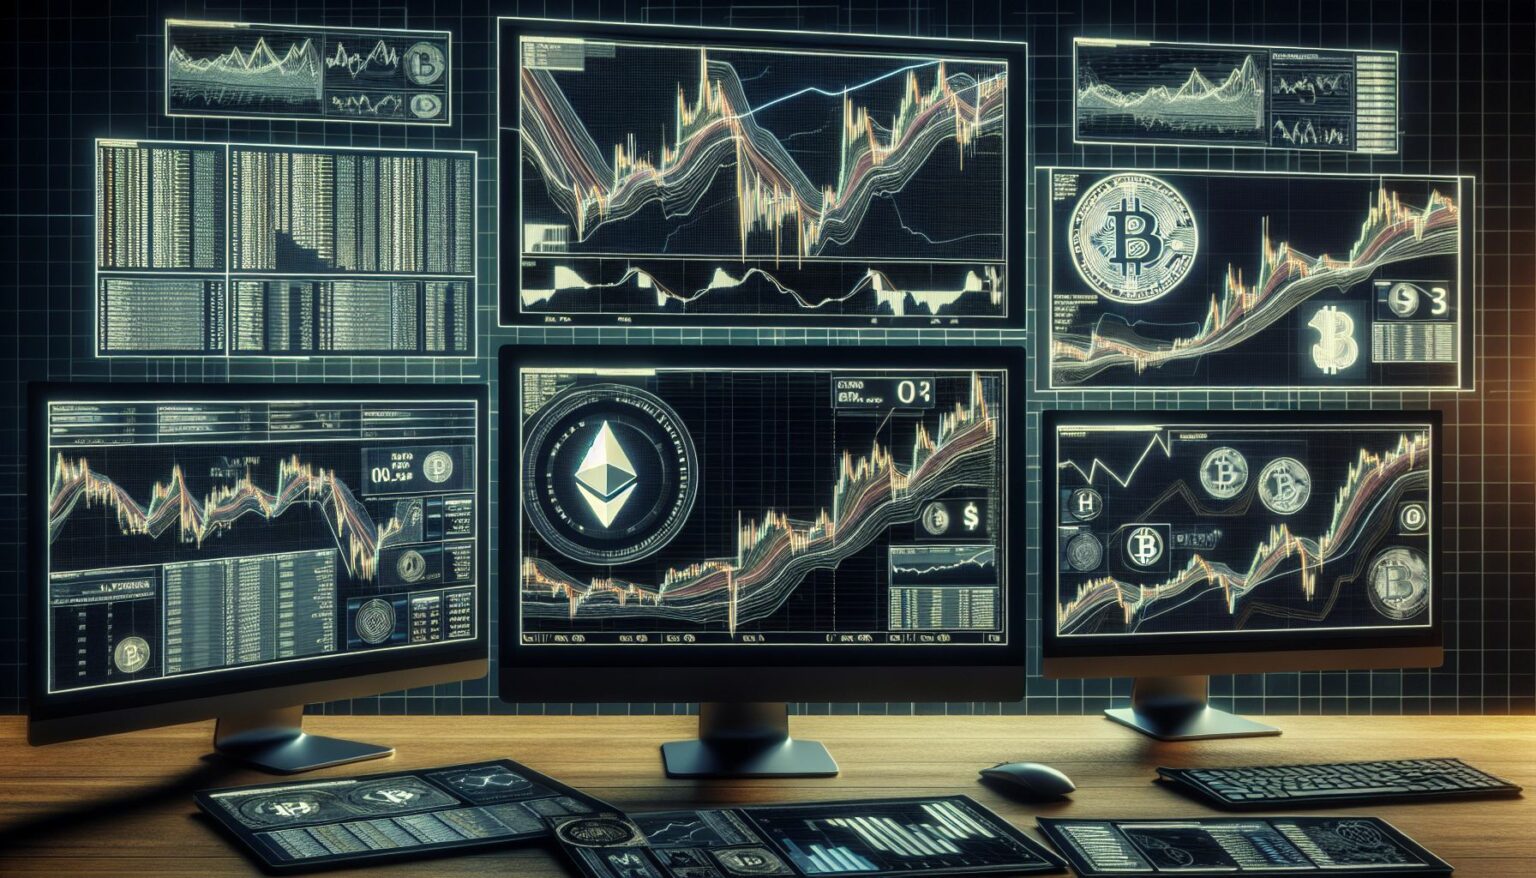 cryptocurrency trading charts and graphs on computer screens with digital currency symbols